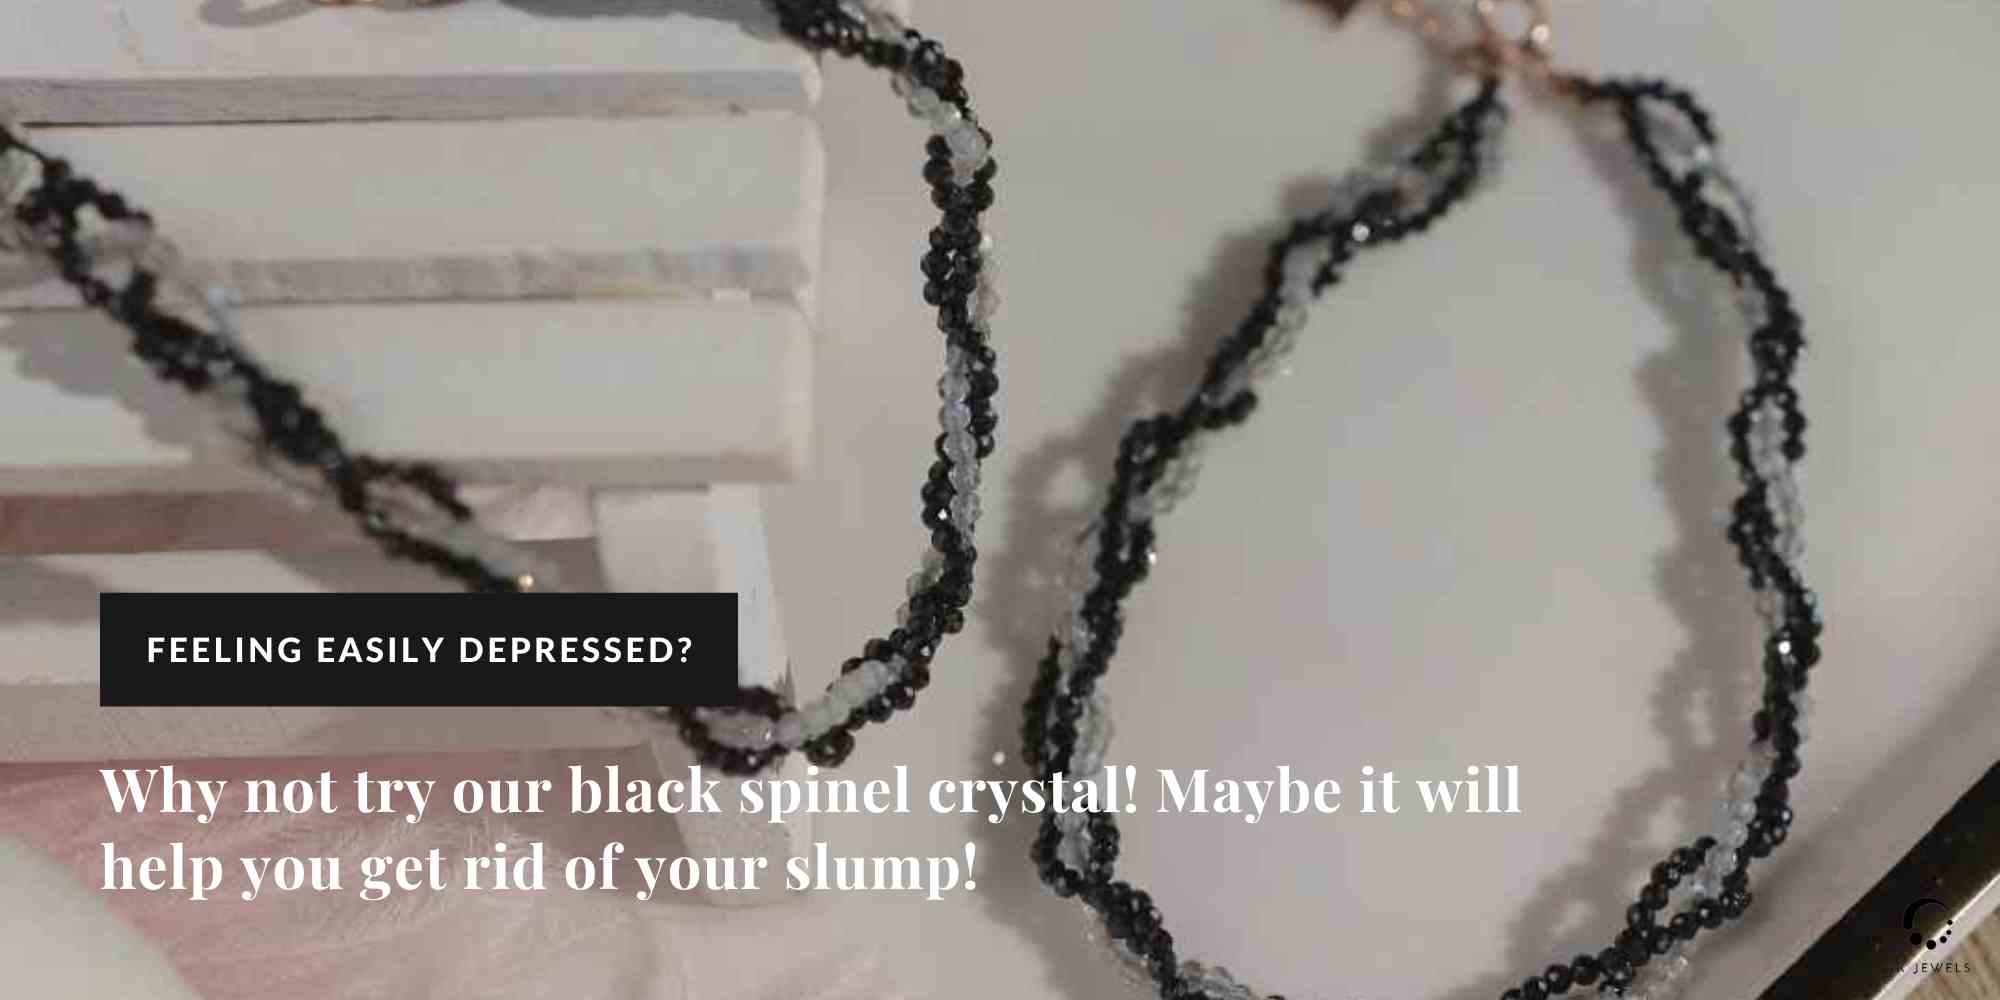 Feeling easily depressed? Why not try our black spinel crystal! Maybe it will help you get rid of your slump!